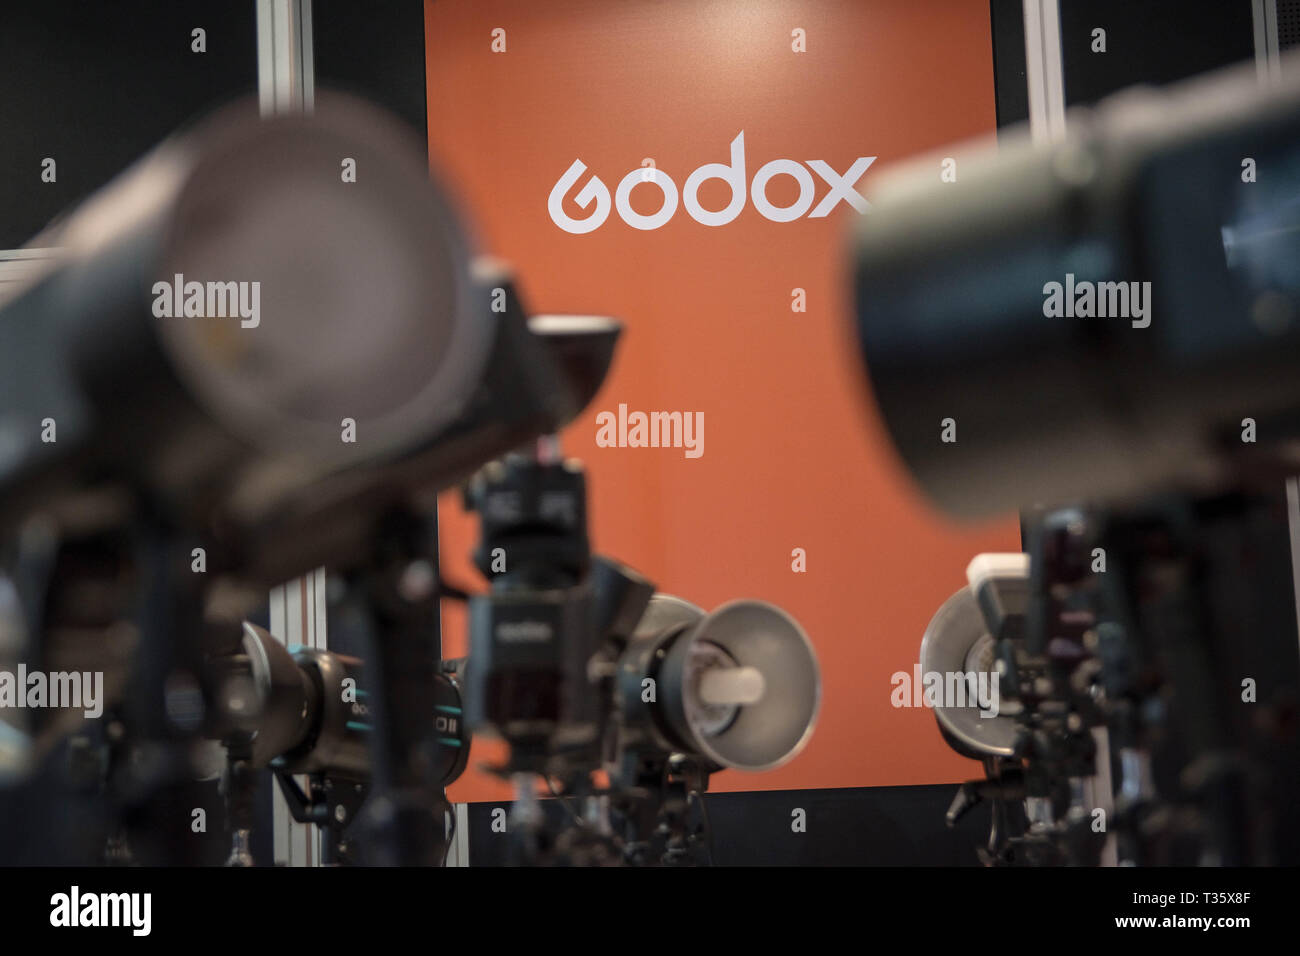 Godox logo seen during the festival. Image +Tech & Photo vision 2019 is a big festival with large corporate delegations, many exhibitions, stores and workshops about photography and video was held In the place of Helexpo Marousi in Athens, Greece. Stock Photo